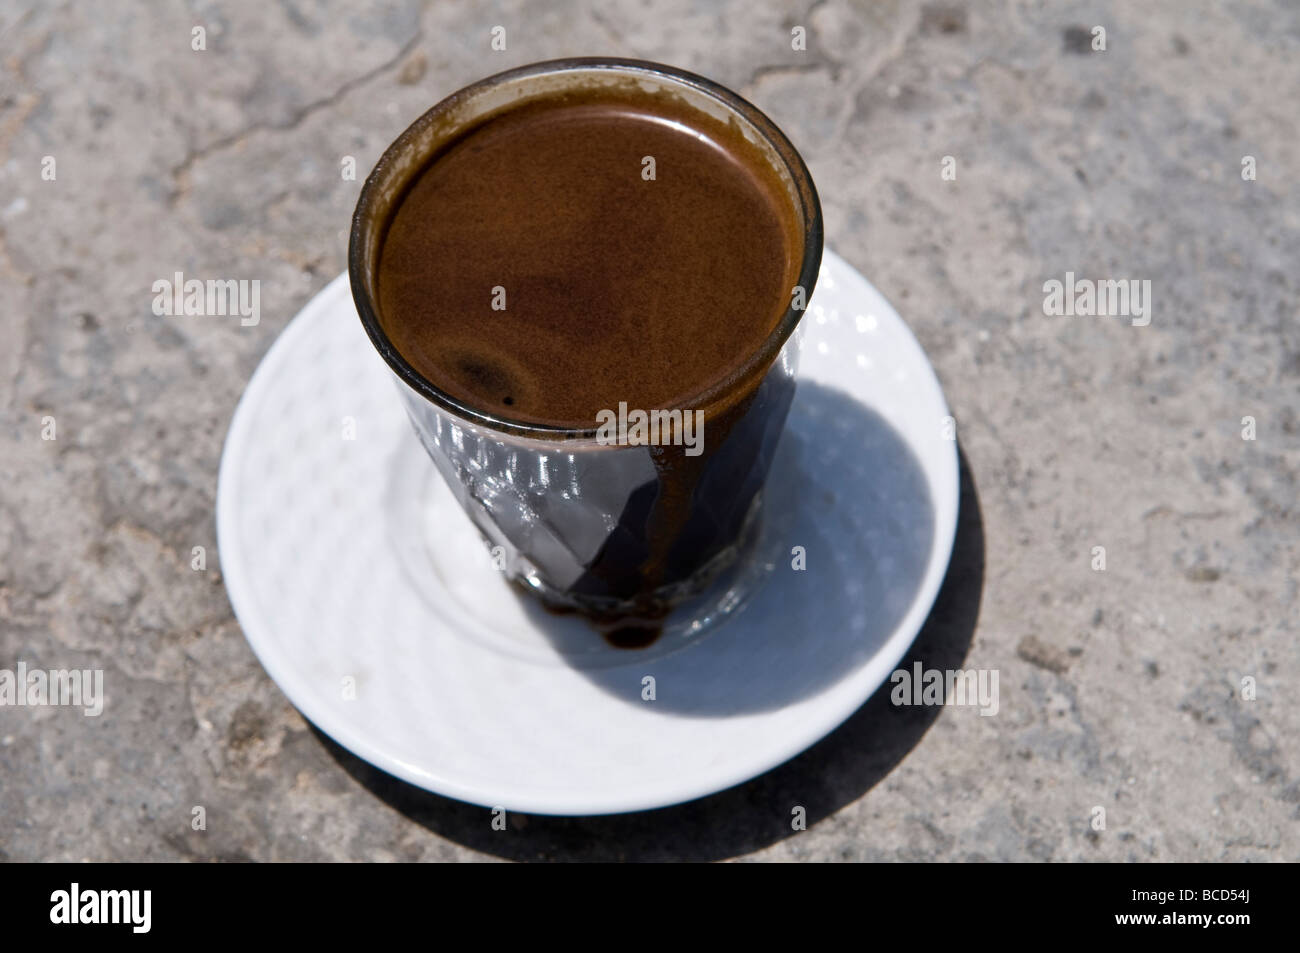 A cup of black Arabic coffee. Stock Photo